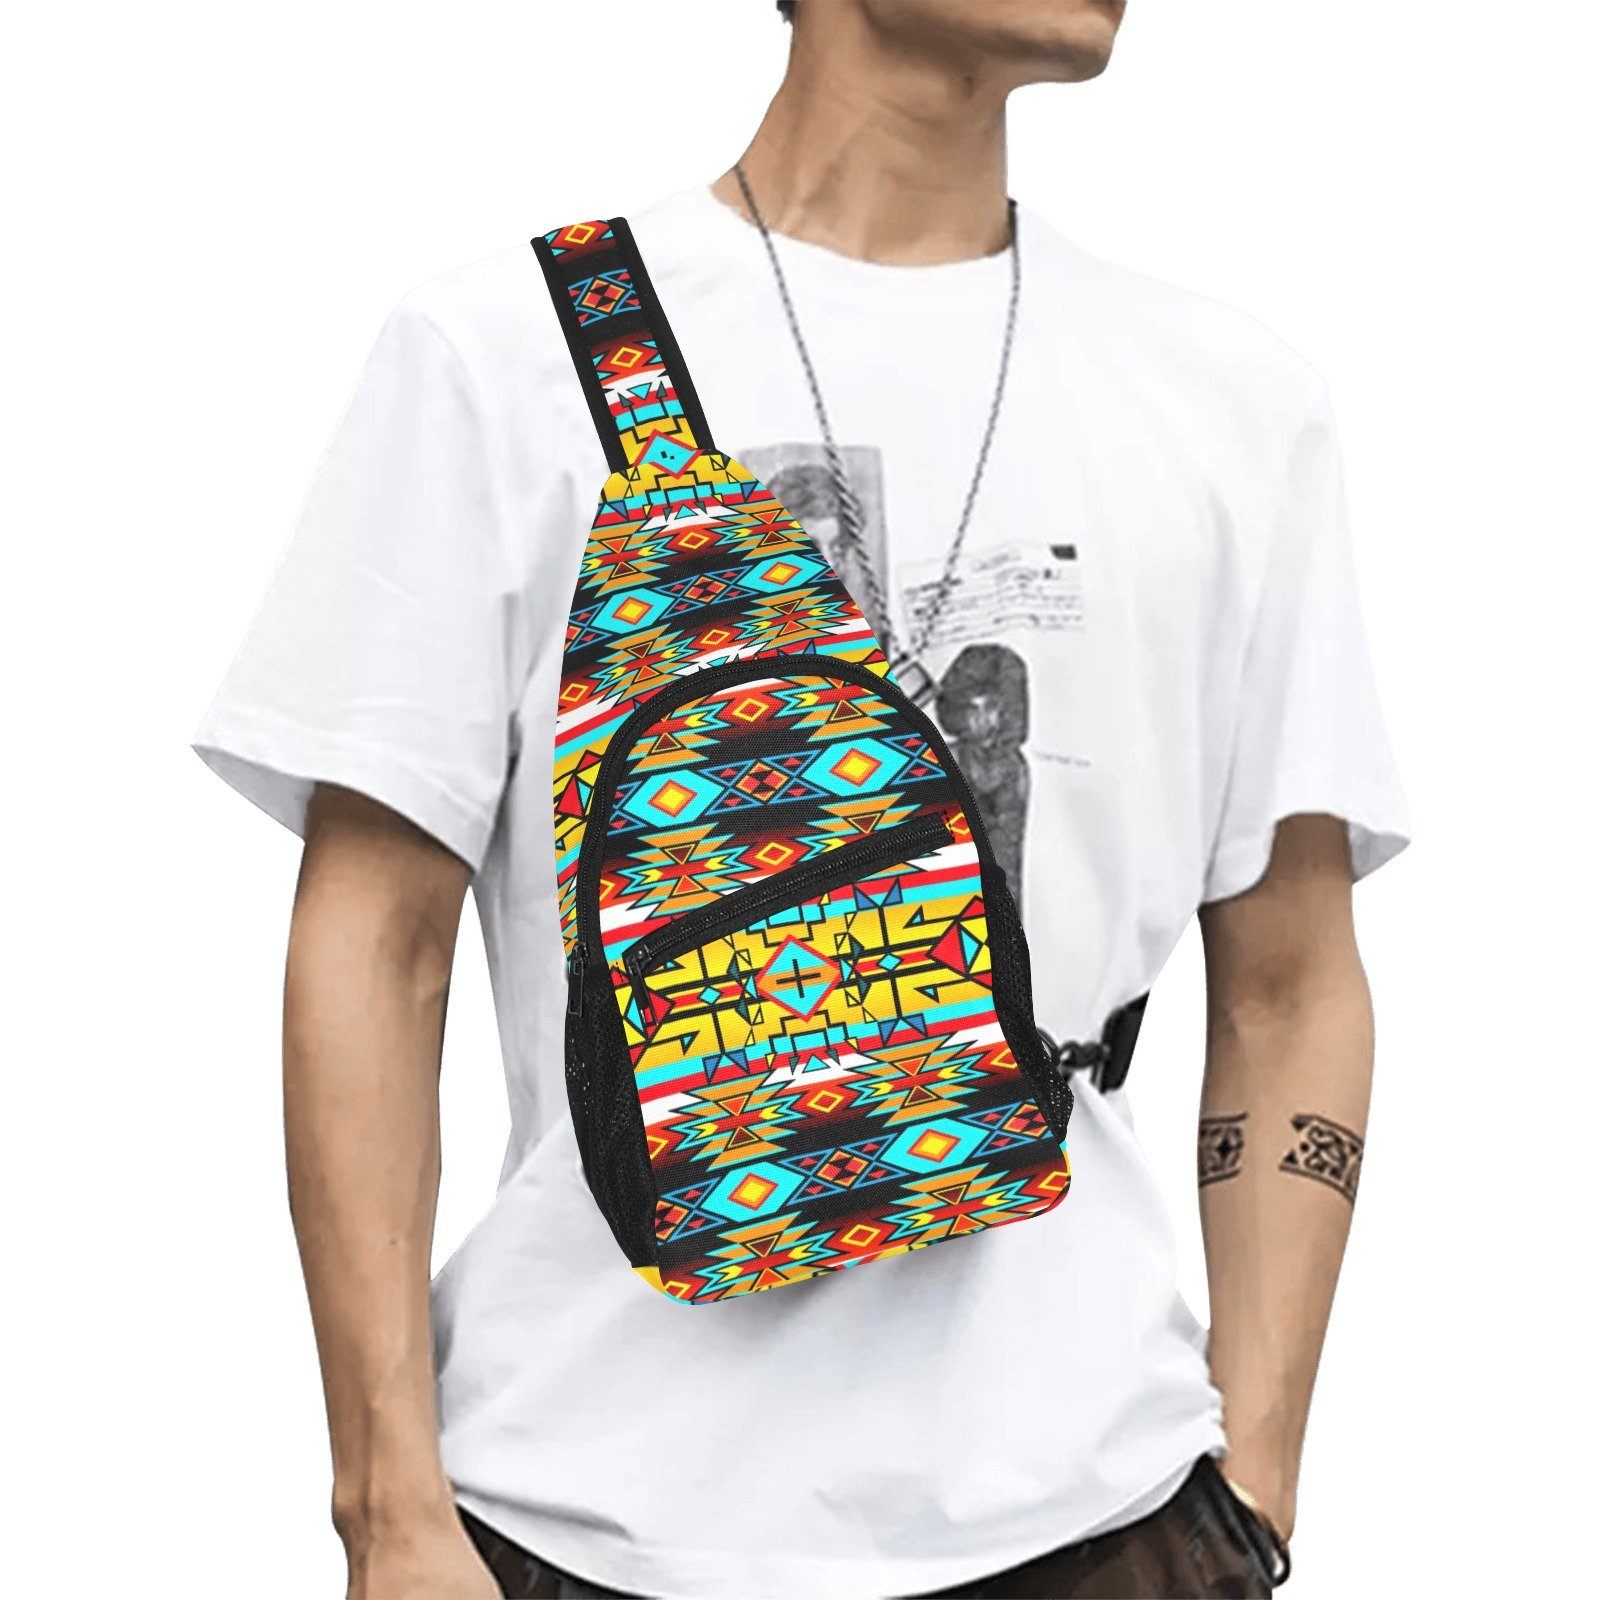 Force of Nature Twister All Over Print Chest Bag (Model 1719) All Over Print Chest Bag (1719) e-joyer 